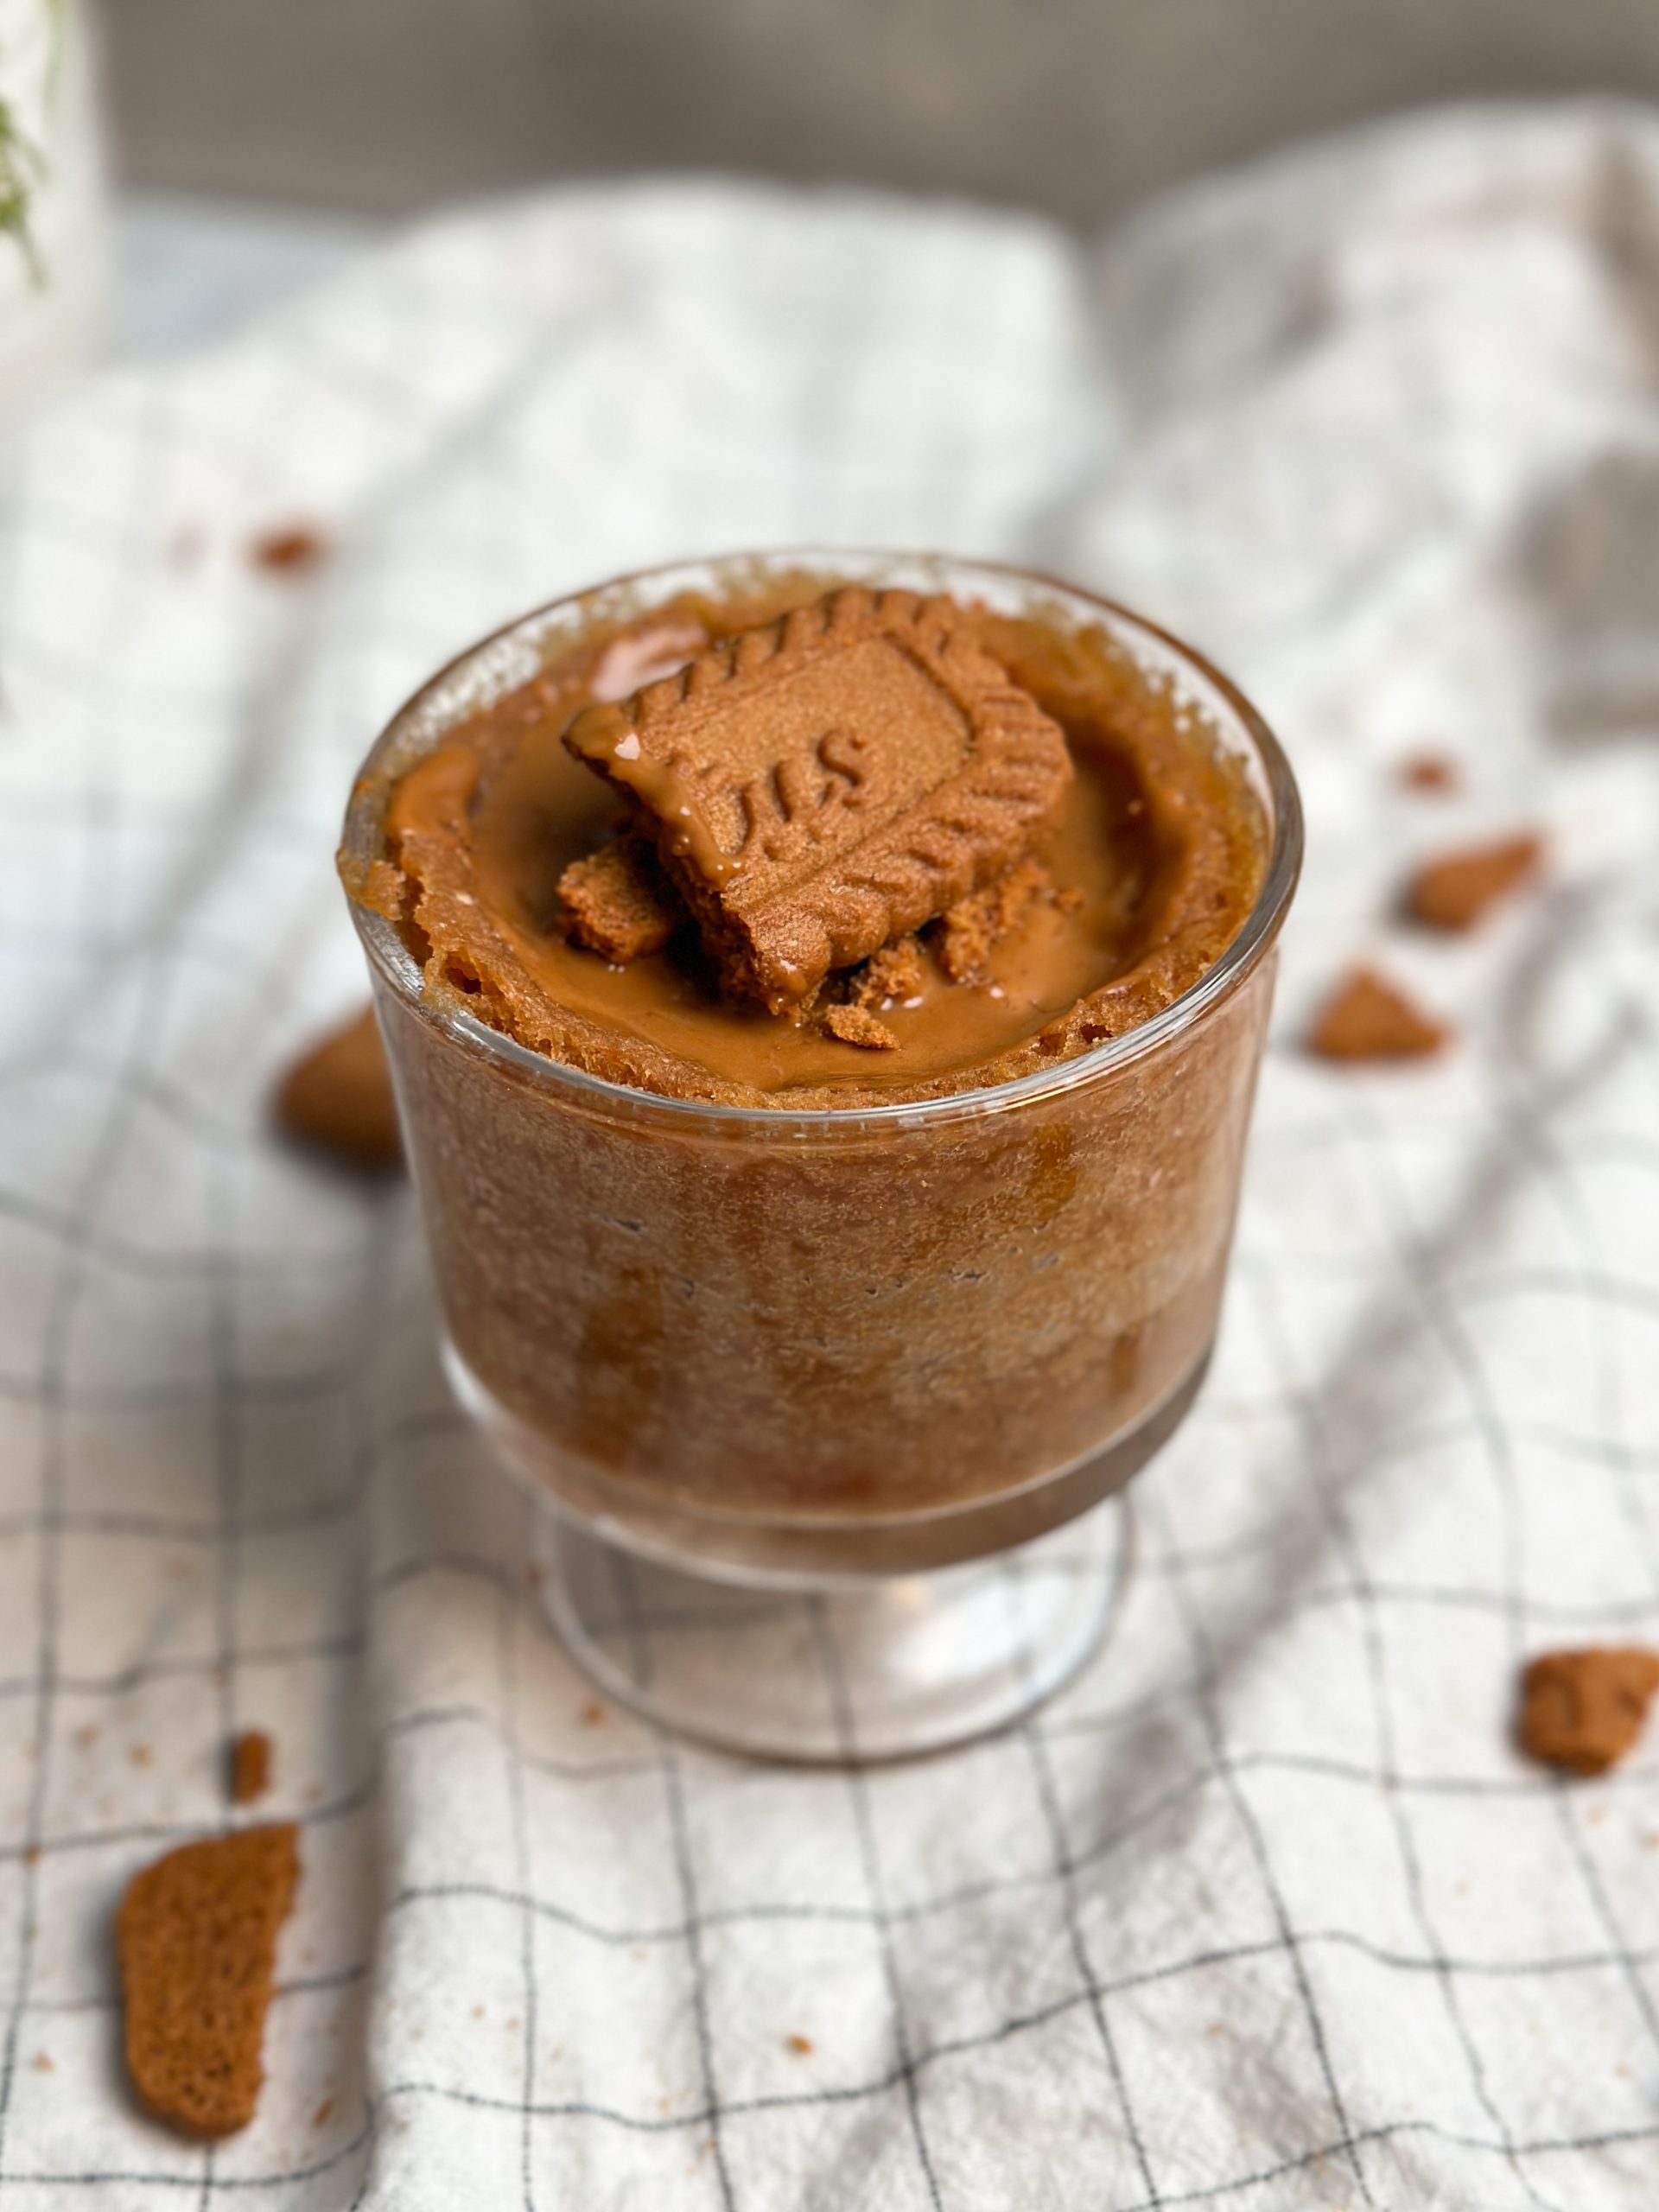 Side picture of a Biscoff mug cake in a glass mug, covered in biscoff cookie butter and crushed cookies